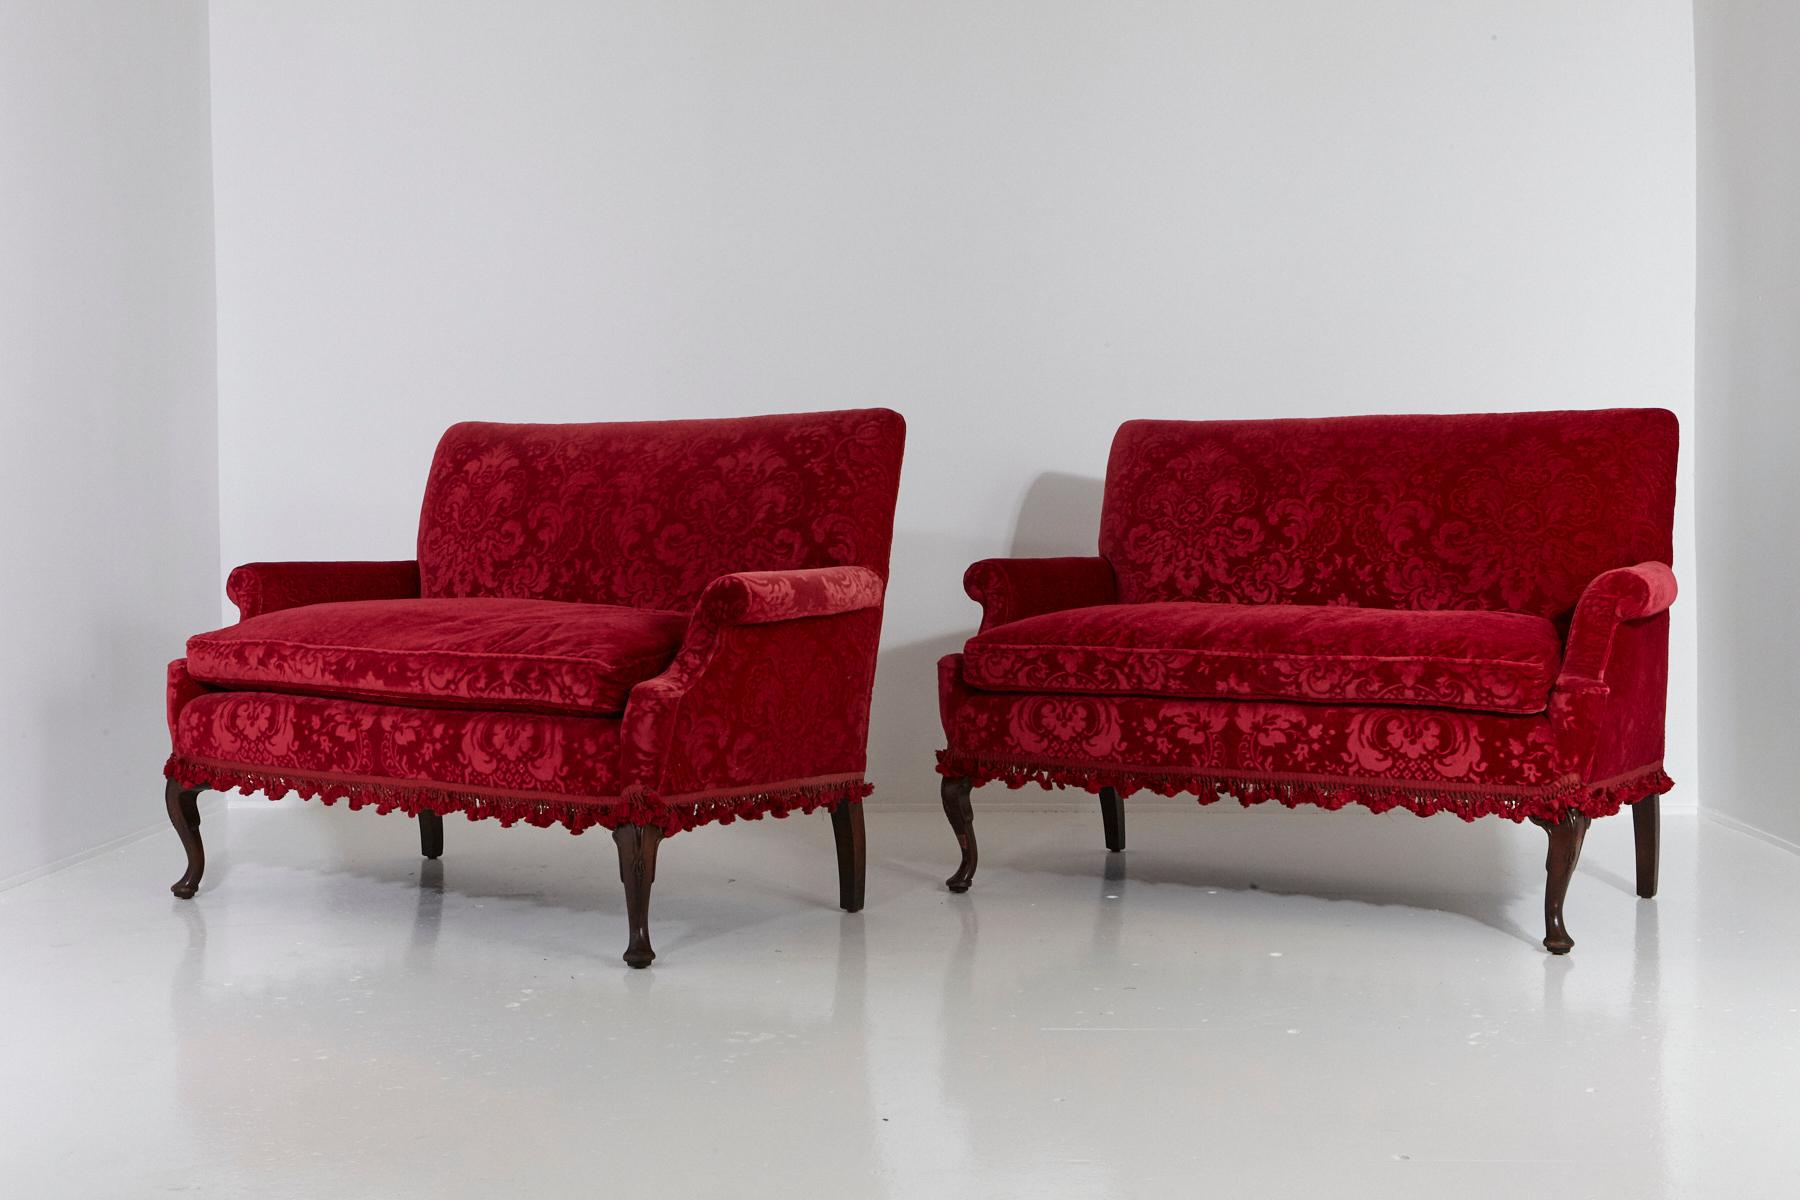 Victorian Sofa in Red Embossed Acanthus Ornament Mohair Upholstery No 2 of 2 5